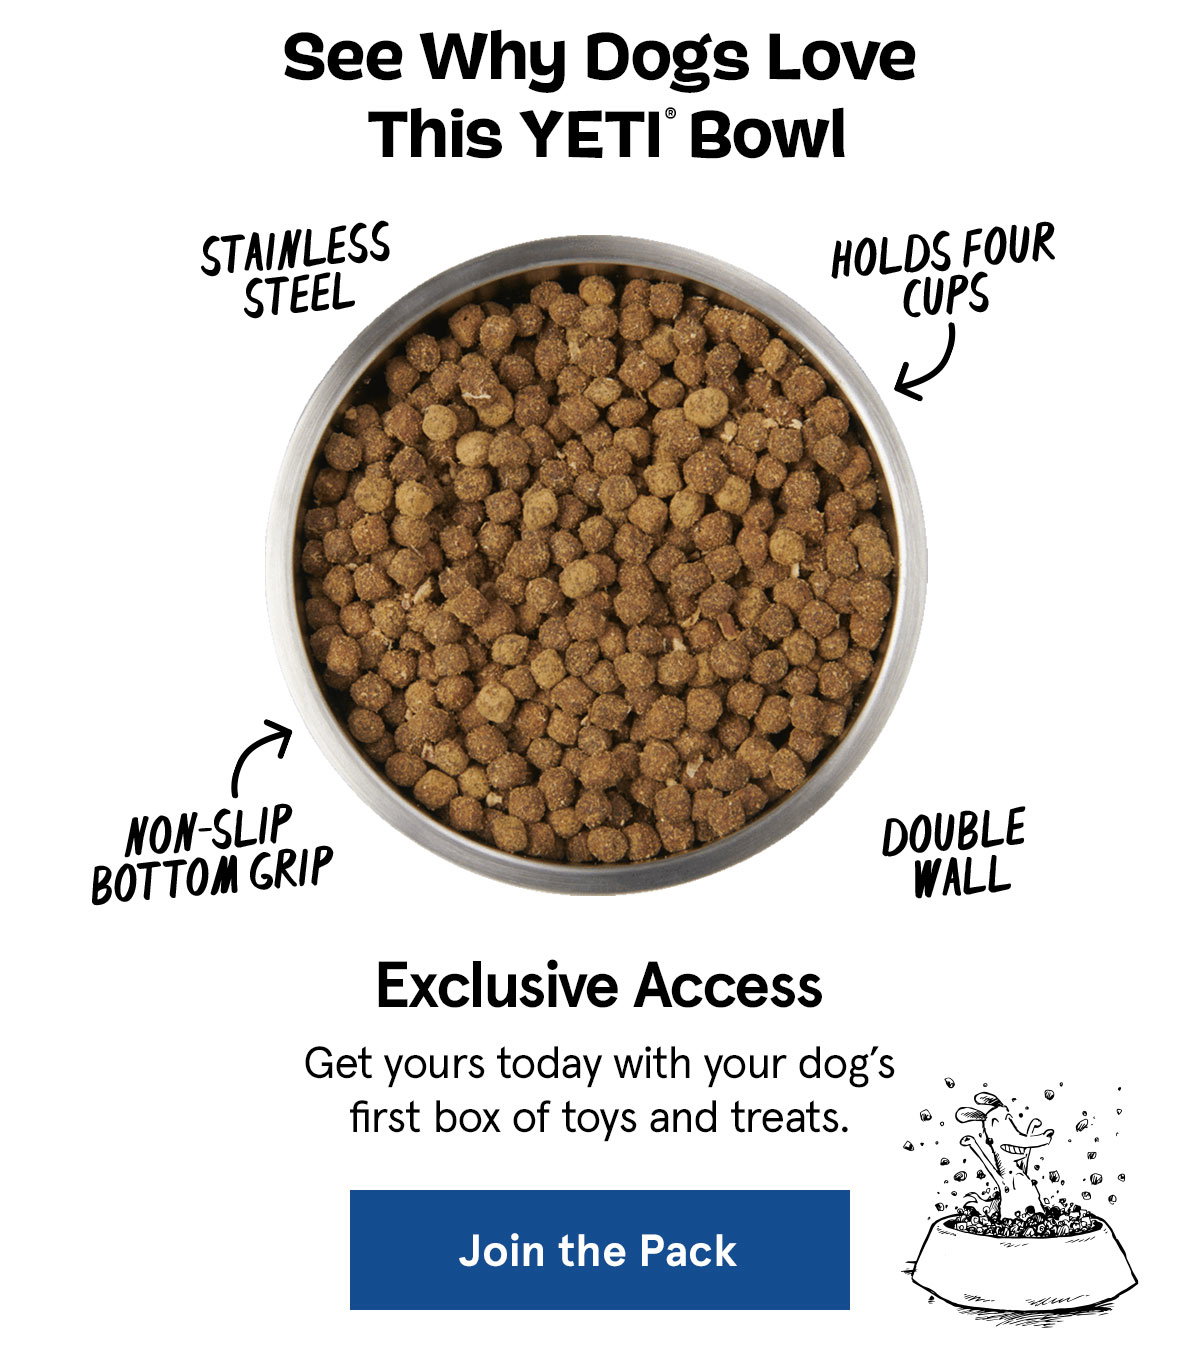 BarkBox Deal: FREE Yeti Dog Bowl With First Box of Toys and Treats